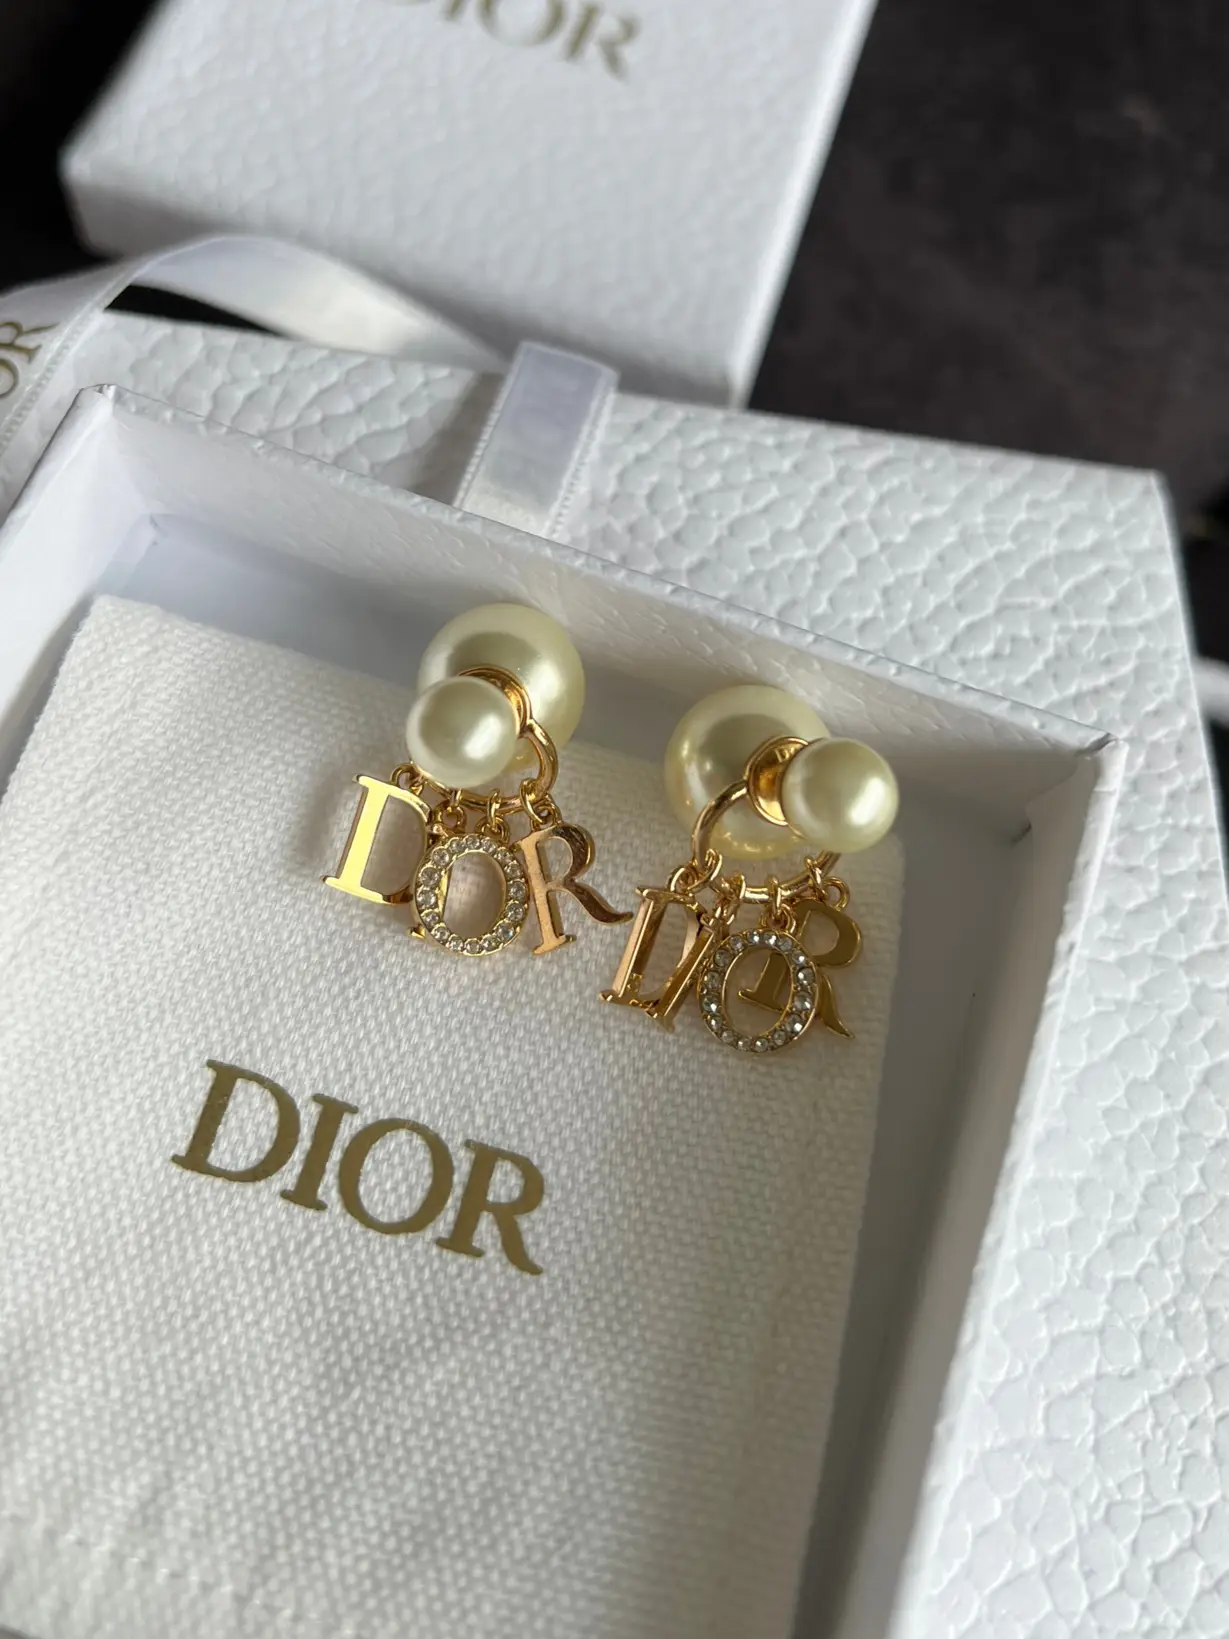 How do you guys find dior shoes on dhgate? : r/DHgate